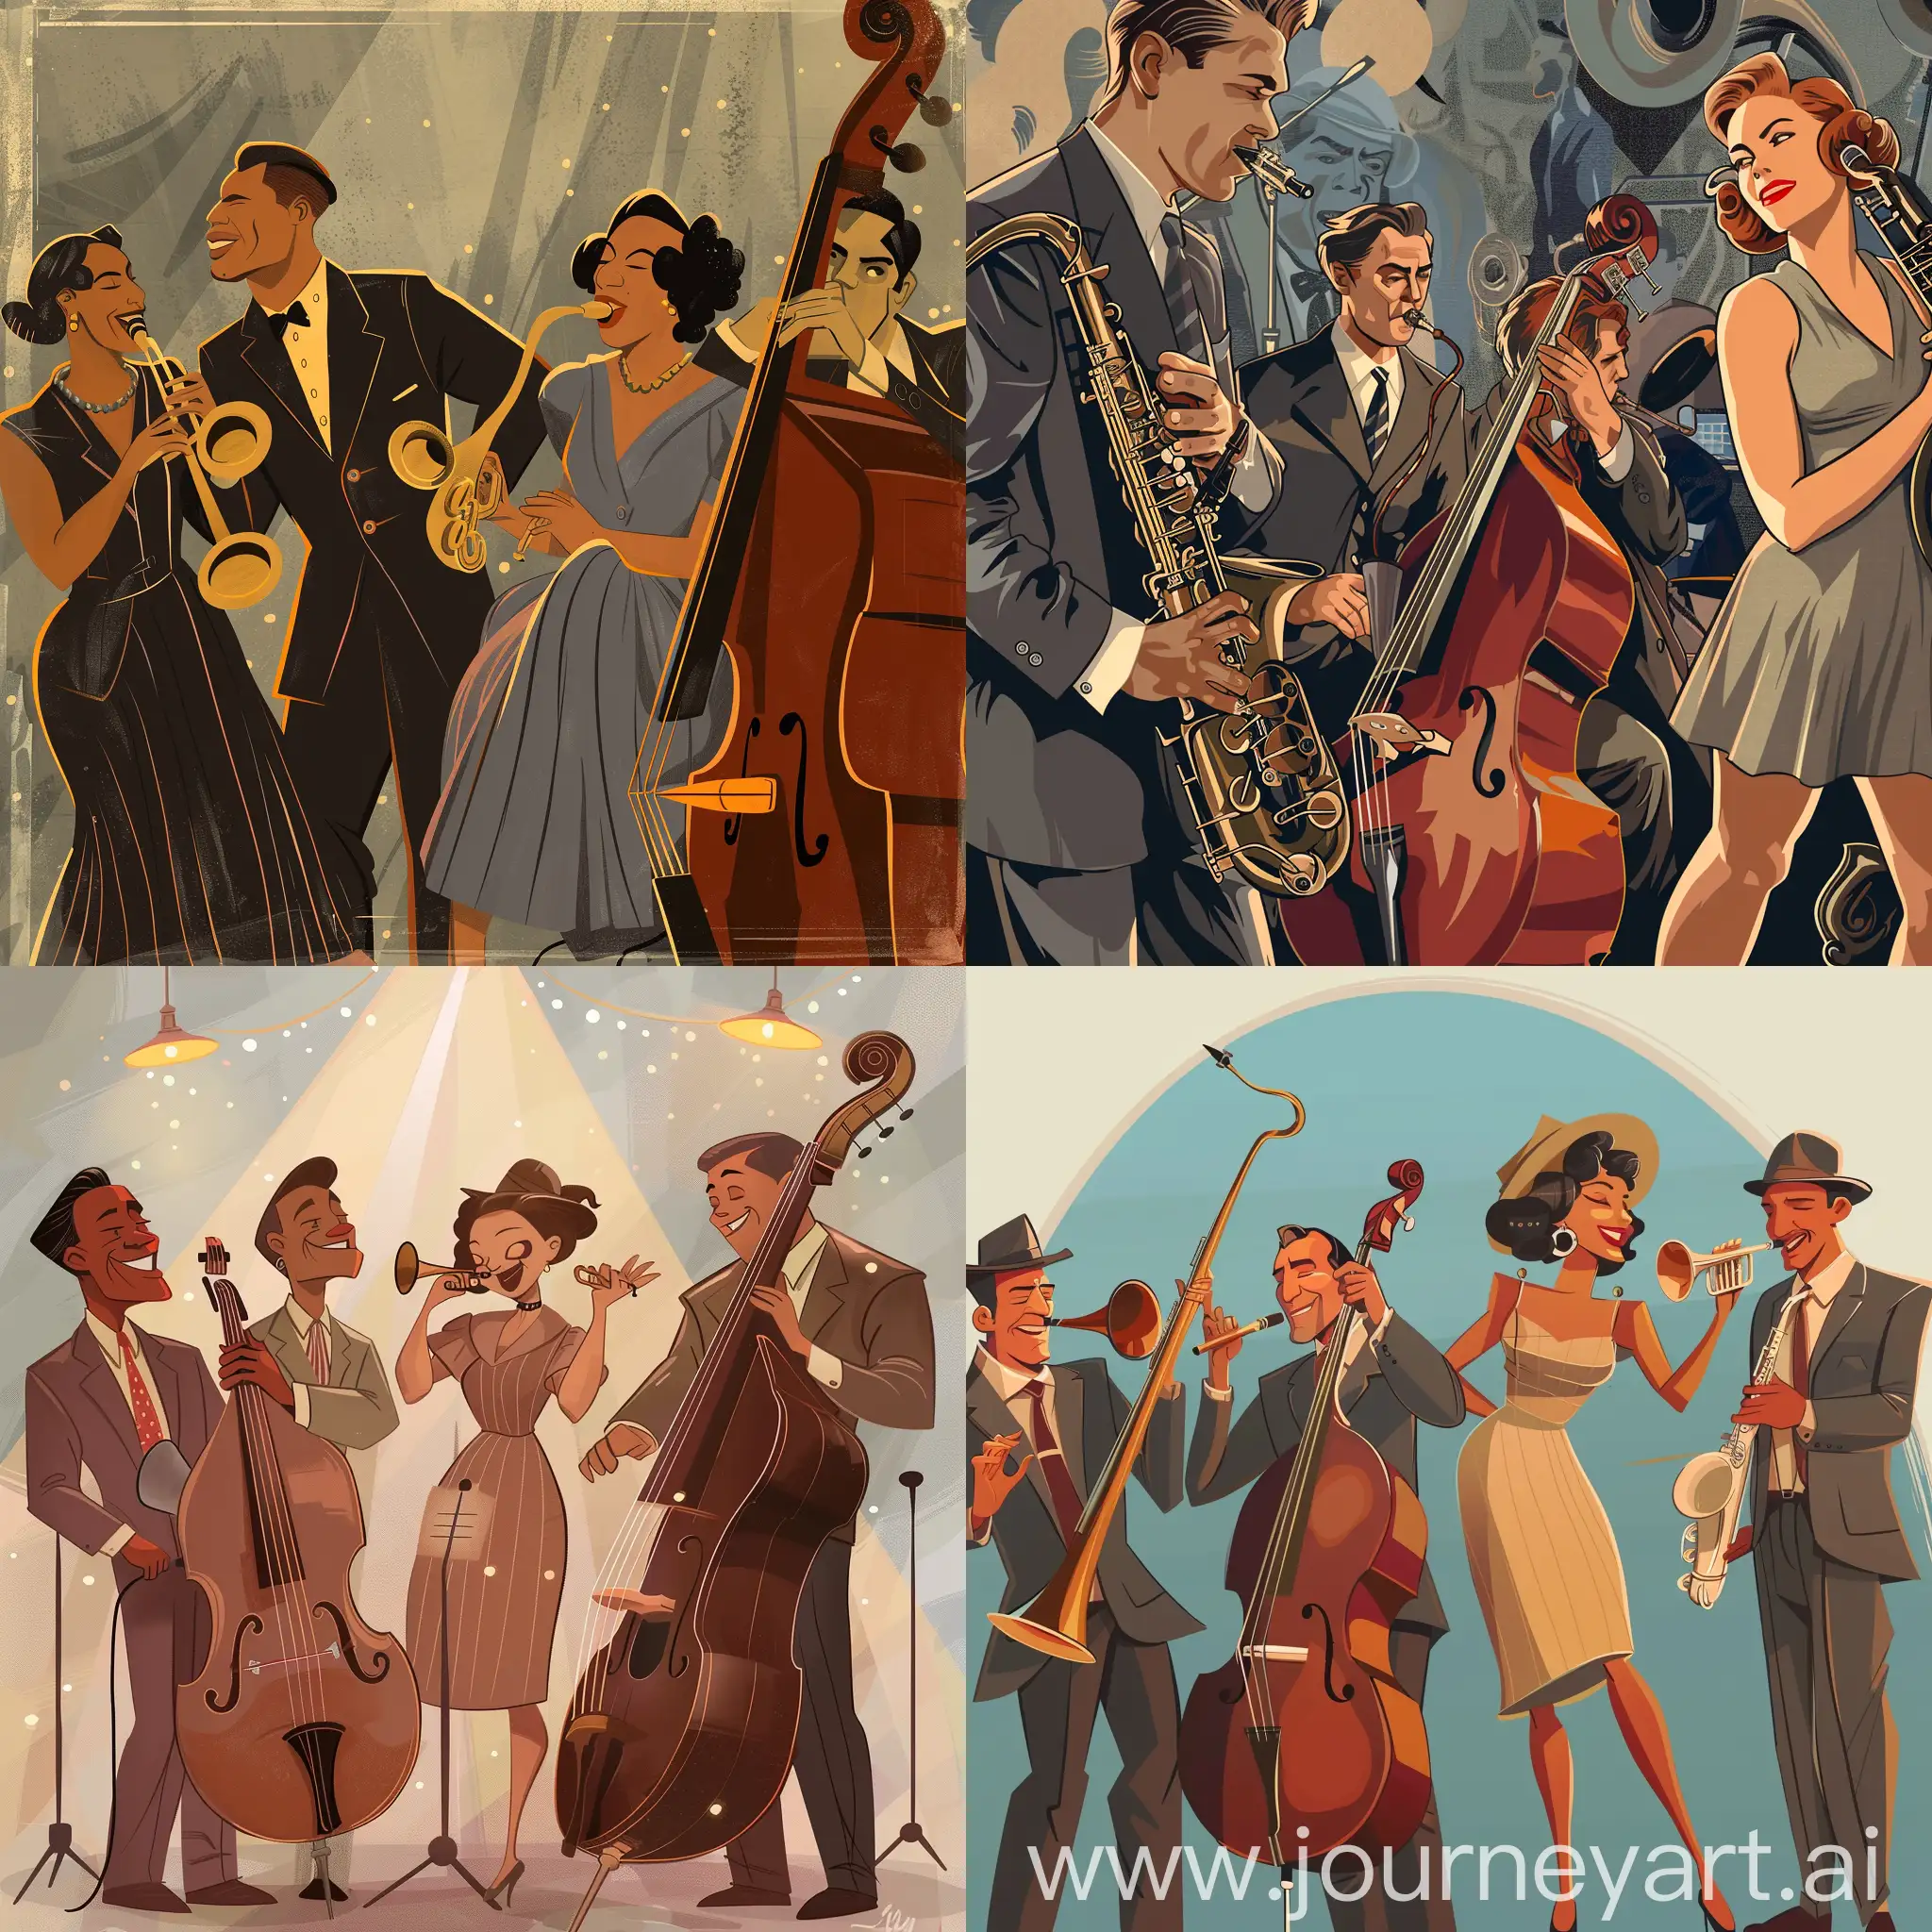 Lilliepad97 style illustration of a 1940s jazz band